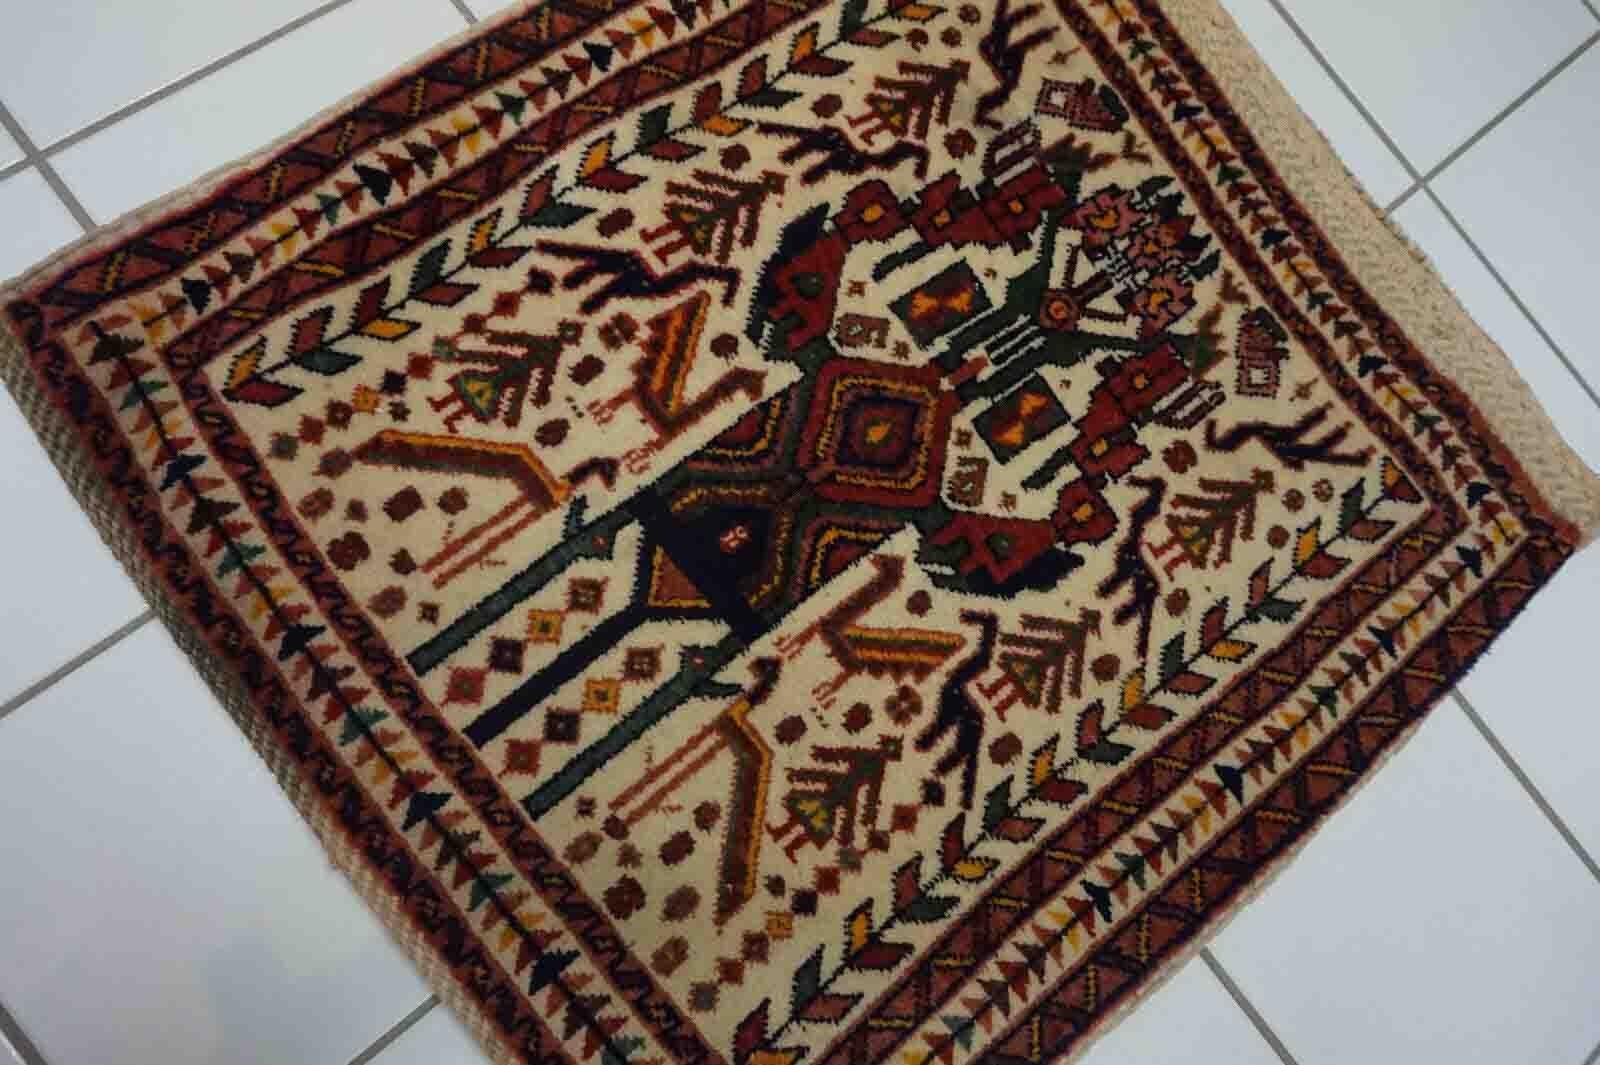 Handmade vintage Afshar salt bag in tribal design. The rug is from the end of 20th century in original good condition.

-condition: original good,

-circa: 1970s,

-size: 1.8' x 2' (57cm x 63cm),

-material: wool,

-country of origin: